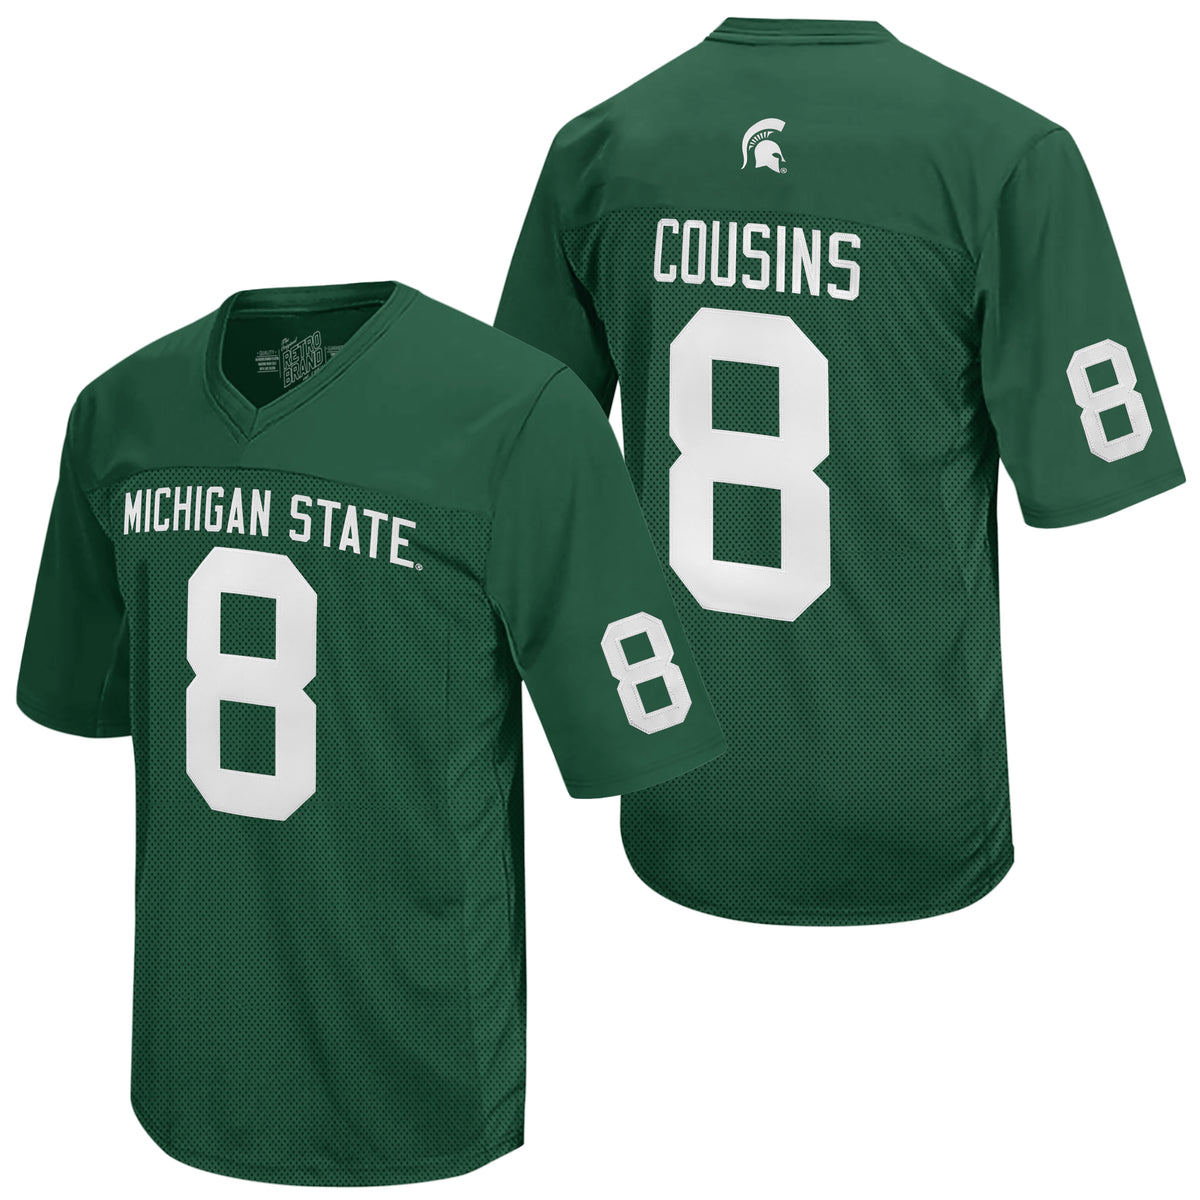 Michigan State Spartans Kirk Cousins Throwback Jersey